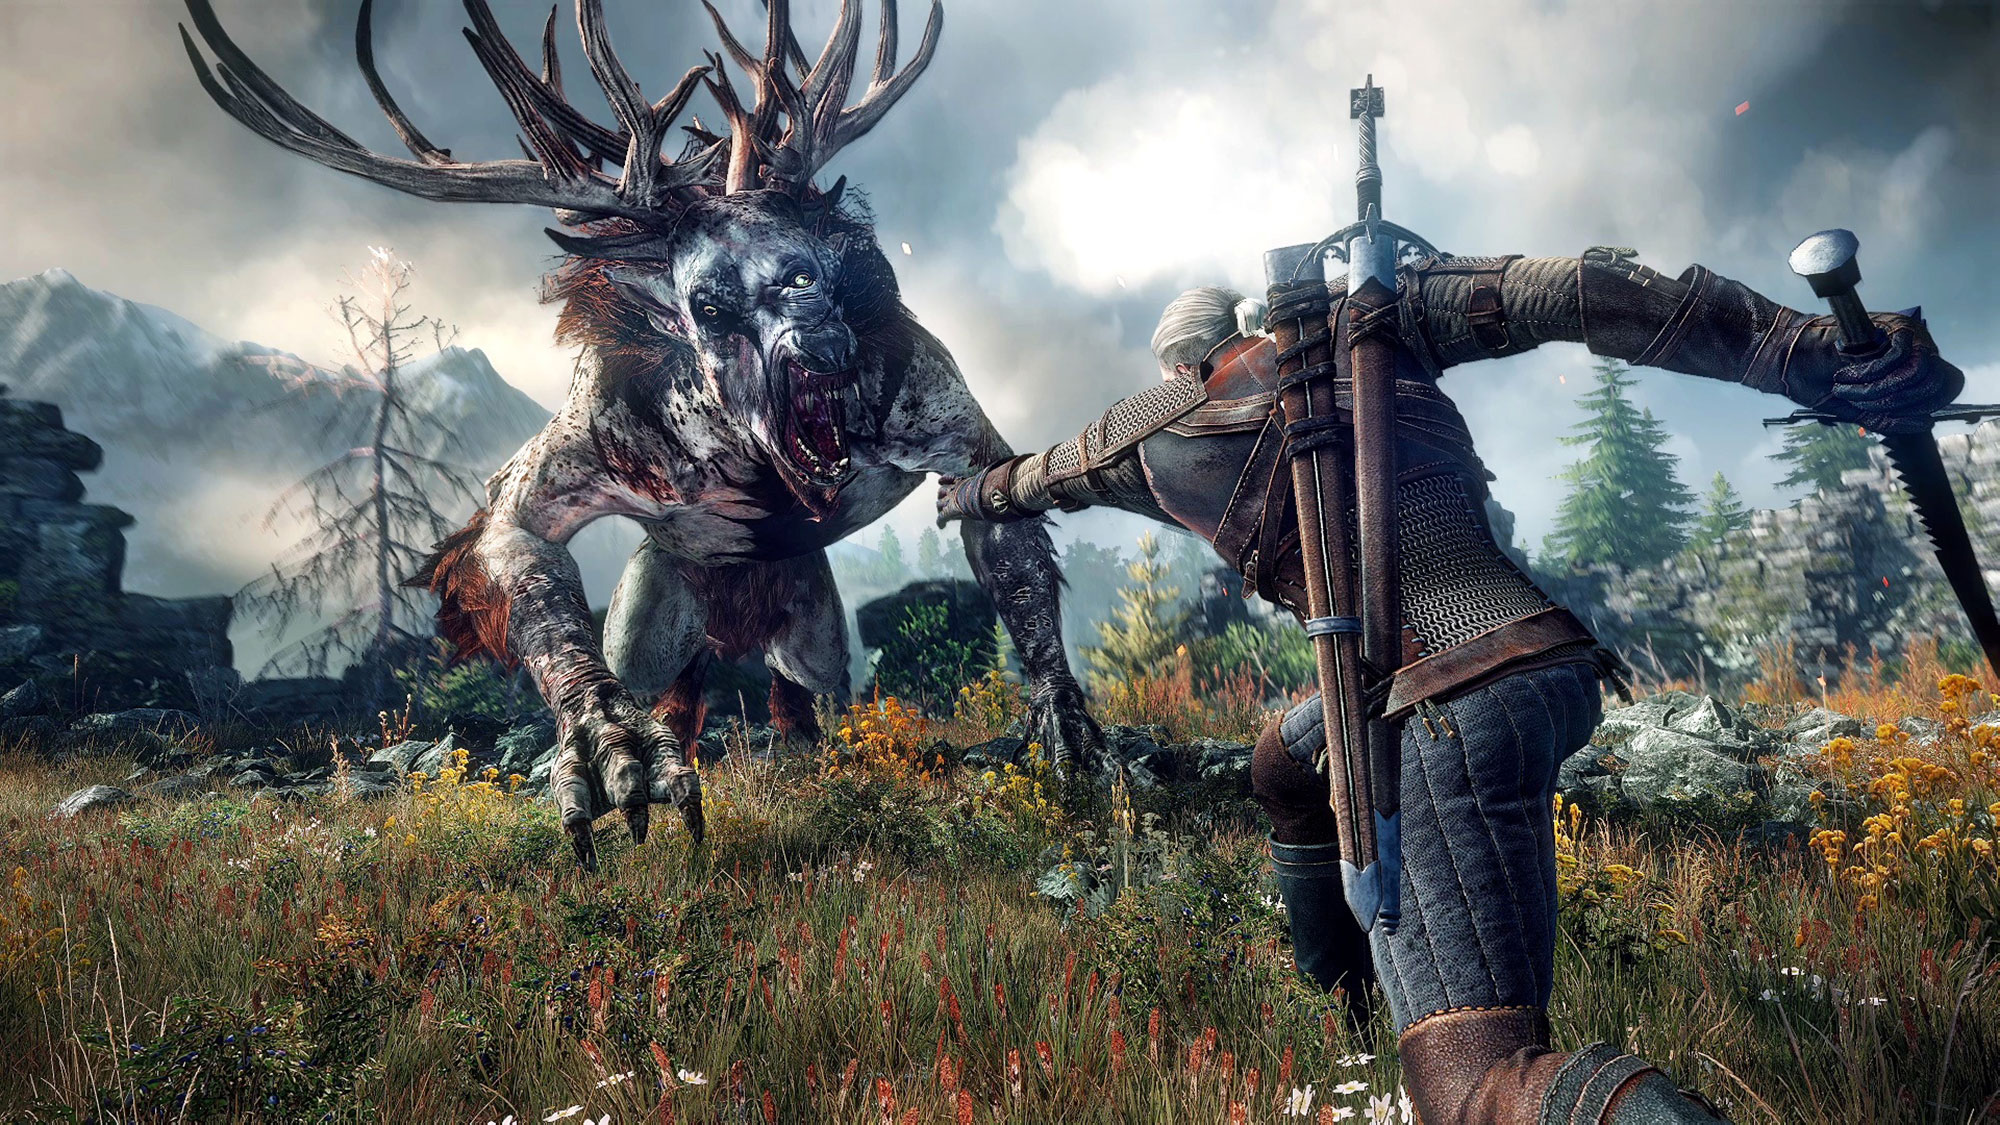 Geralt attacks a monster in The Witcher 3: Wild Hunt